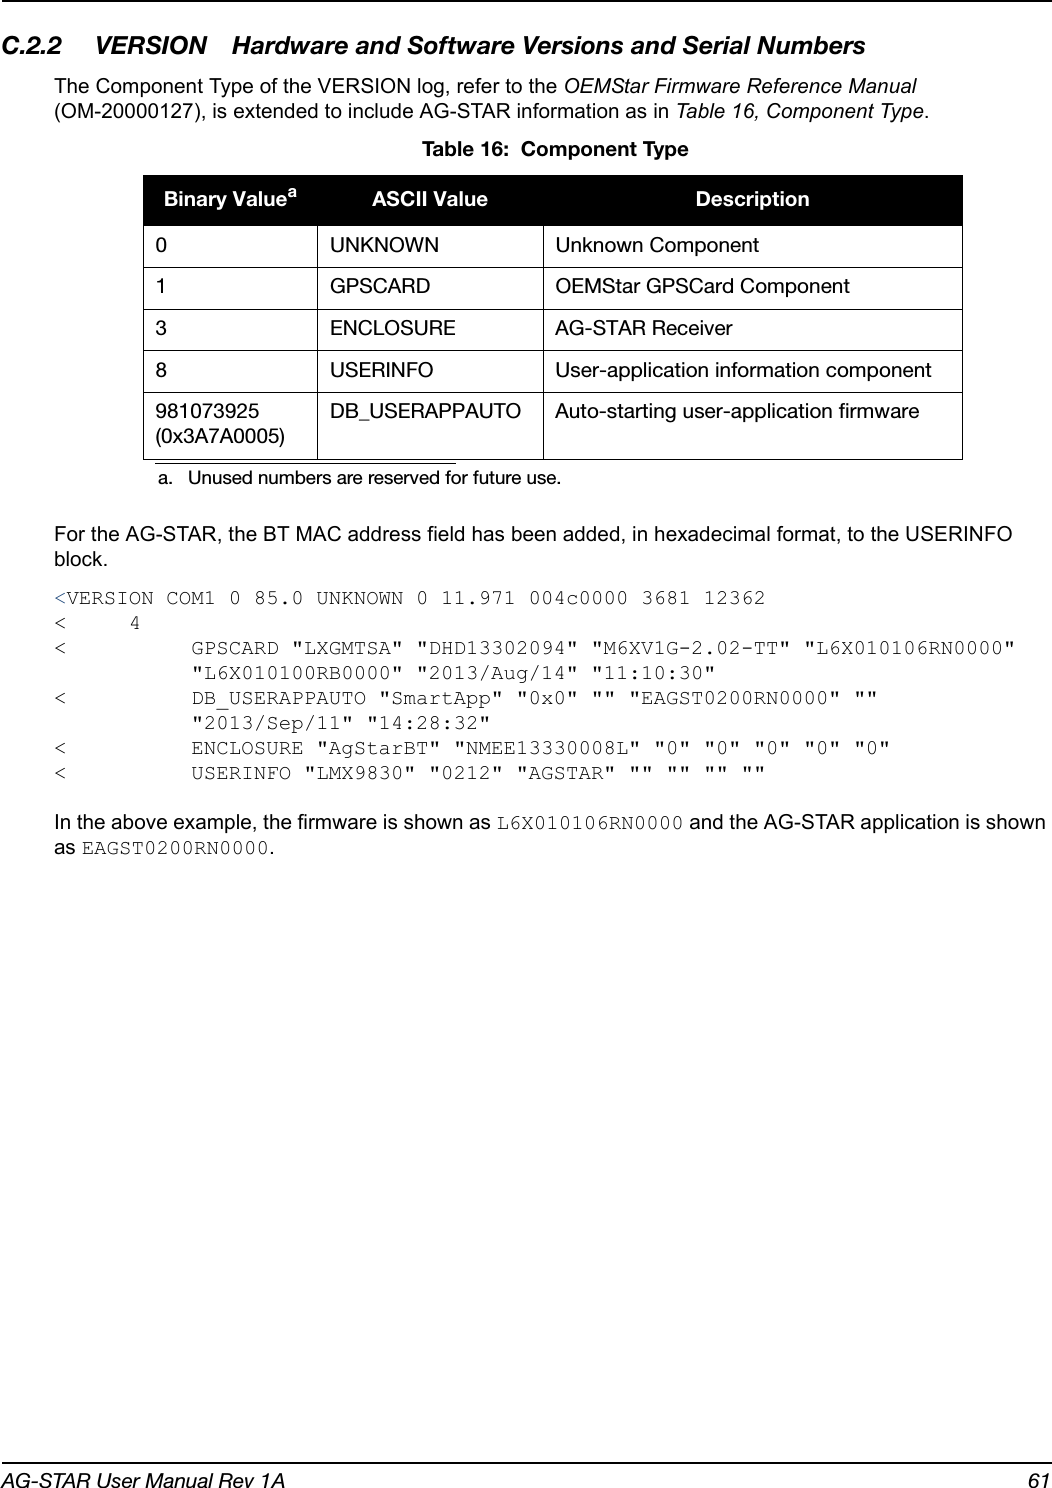 AG-STAR User Manual Rev 1A 61C.2.2 VERSION Hardware and Software Versions and Serial NumbersThe Component Type of the VERSION log, refer to the OEMStar Firmware Reference Manual (OM-20000127), is extended to include AG-STAR information as in Table 16, Component Type. Table 16:  Component TypeFor the AG-STAR, the BT MAC address field has been added, in hexadecimal format, to the USERINFO block.&lt;VERSION COM1 0 85.0 UNKNOWN 0 11.971 004c0000 3681 12362&lt; 4&lt;  GPSCARD &quot;LXGMTSA&quot; &quot;DHD13302094&quot; &quot;M6XV1G-2.02-TT&quot; &quot;L6X010106RN0000&quot;&quot;L6X010100RB0000&quot; &quot;2013/Aug/14&quot; &quot;11:10:30&quot;&lt;  DB_USERAPPAUTO &quot;SmartApp&quot; &quot;0x0&quot; &quot;&quot; &quot;EAGST0200RN0000&quot; &quot;&quot; &quot;2013/Sep/11&quot; &quot;14:28:32&quot;&lt;  ENCLOSURE &quot;AgStarBT&quot; &quot;NMEE13330008L&quot; &quot;0&quot; &quot;0&quot; &quot;0&quot; &quot;0&quot; &quot;0&quot;&lt;  USERINFO &quot;LMX9830&quot; &quot;0212&quot; &quot;AGSTAR&quot; &quot;&quot; &quot;&quot; &quot;&quot; &quot;&quot;In the above example, the firmware is shown as L6X010106RN0000 and the AG-STAR application is shown as EAGST0200RN0000.Binary Valueaa. Unused numbers are reserved for future use.ASCII Value Description0 UNKNOWN Unknown Component1 GPSCARD OEMStar GPSCard Component3 ENCLOSURE AG-STAR Receiver8 USERINFO User-application information component981073925 (0x3A7A0005)DB_USERAPPAUTO Auto-starting user-application firmware